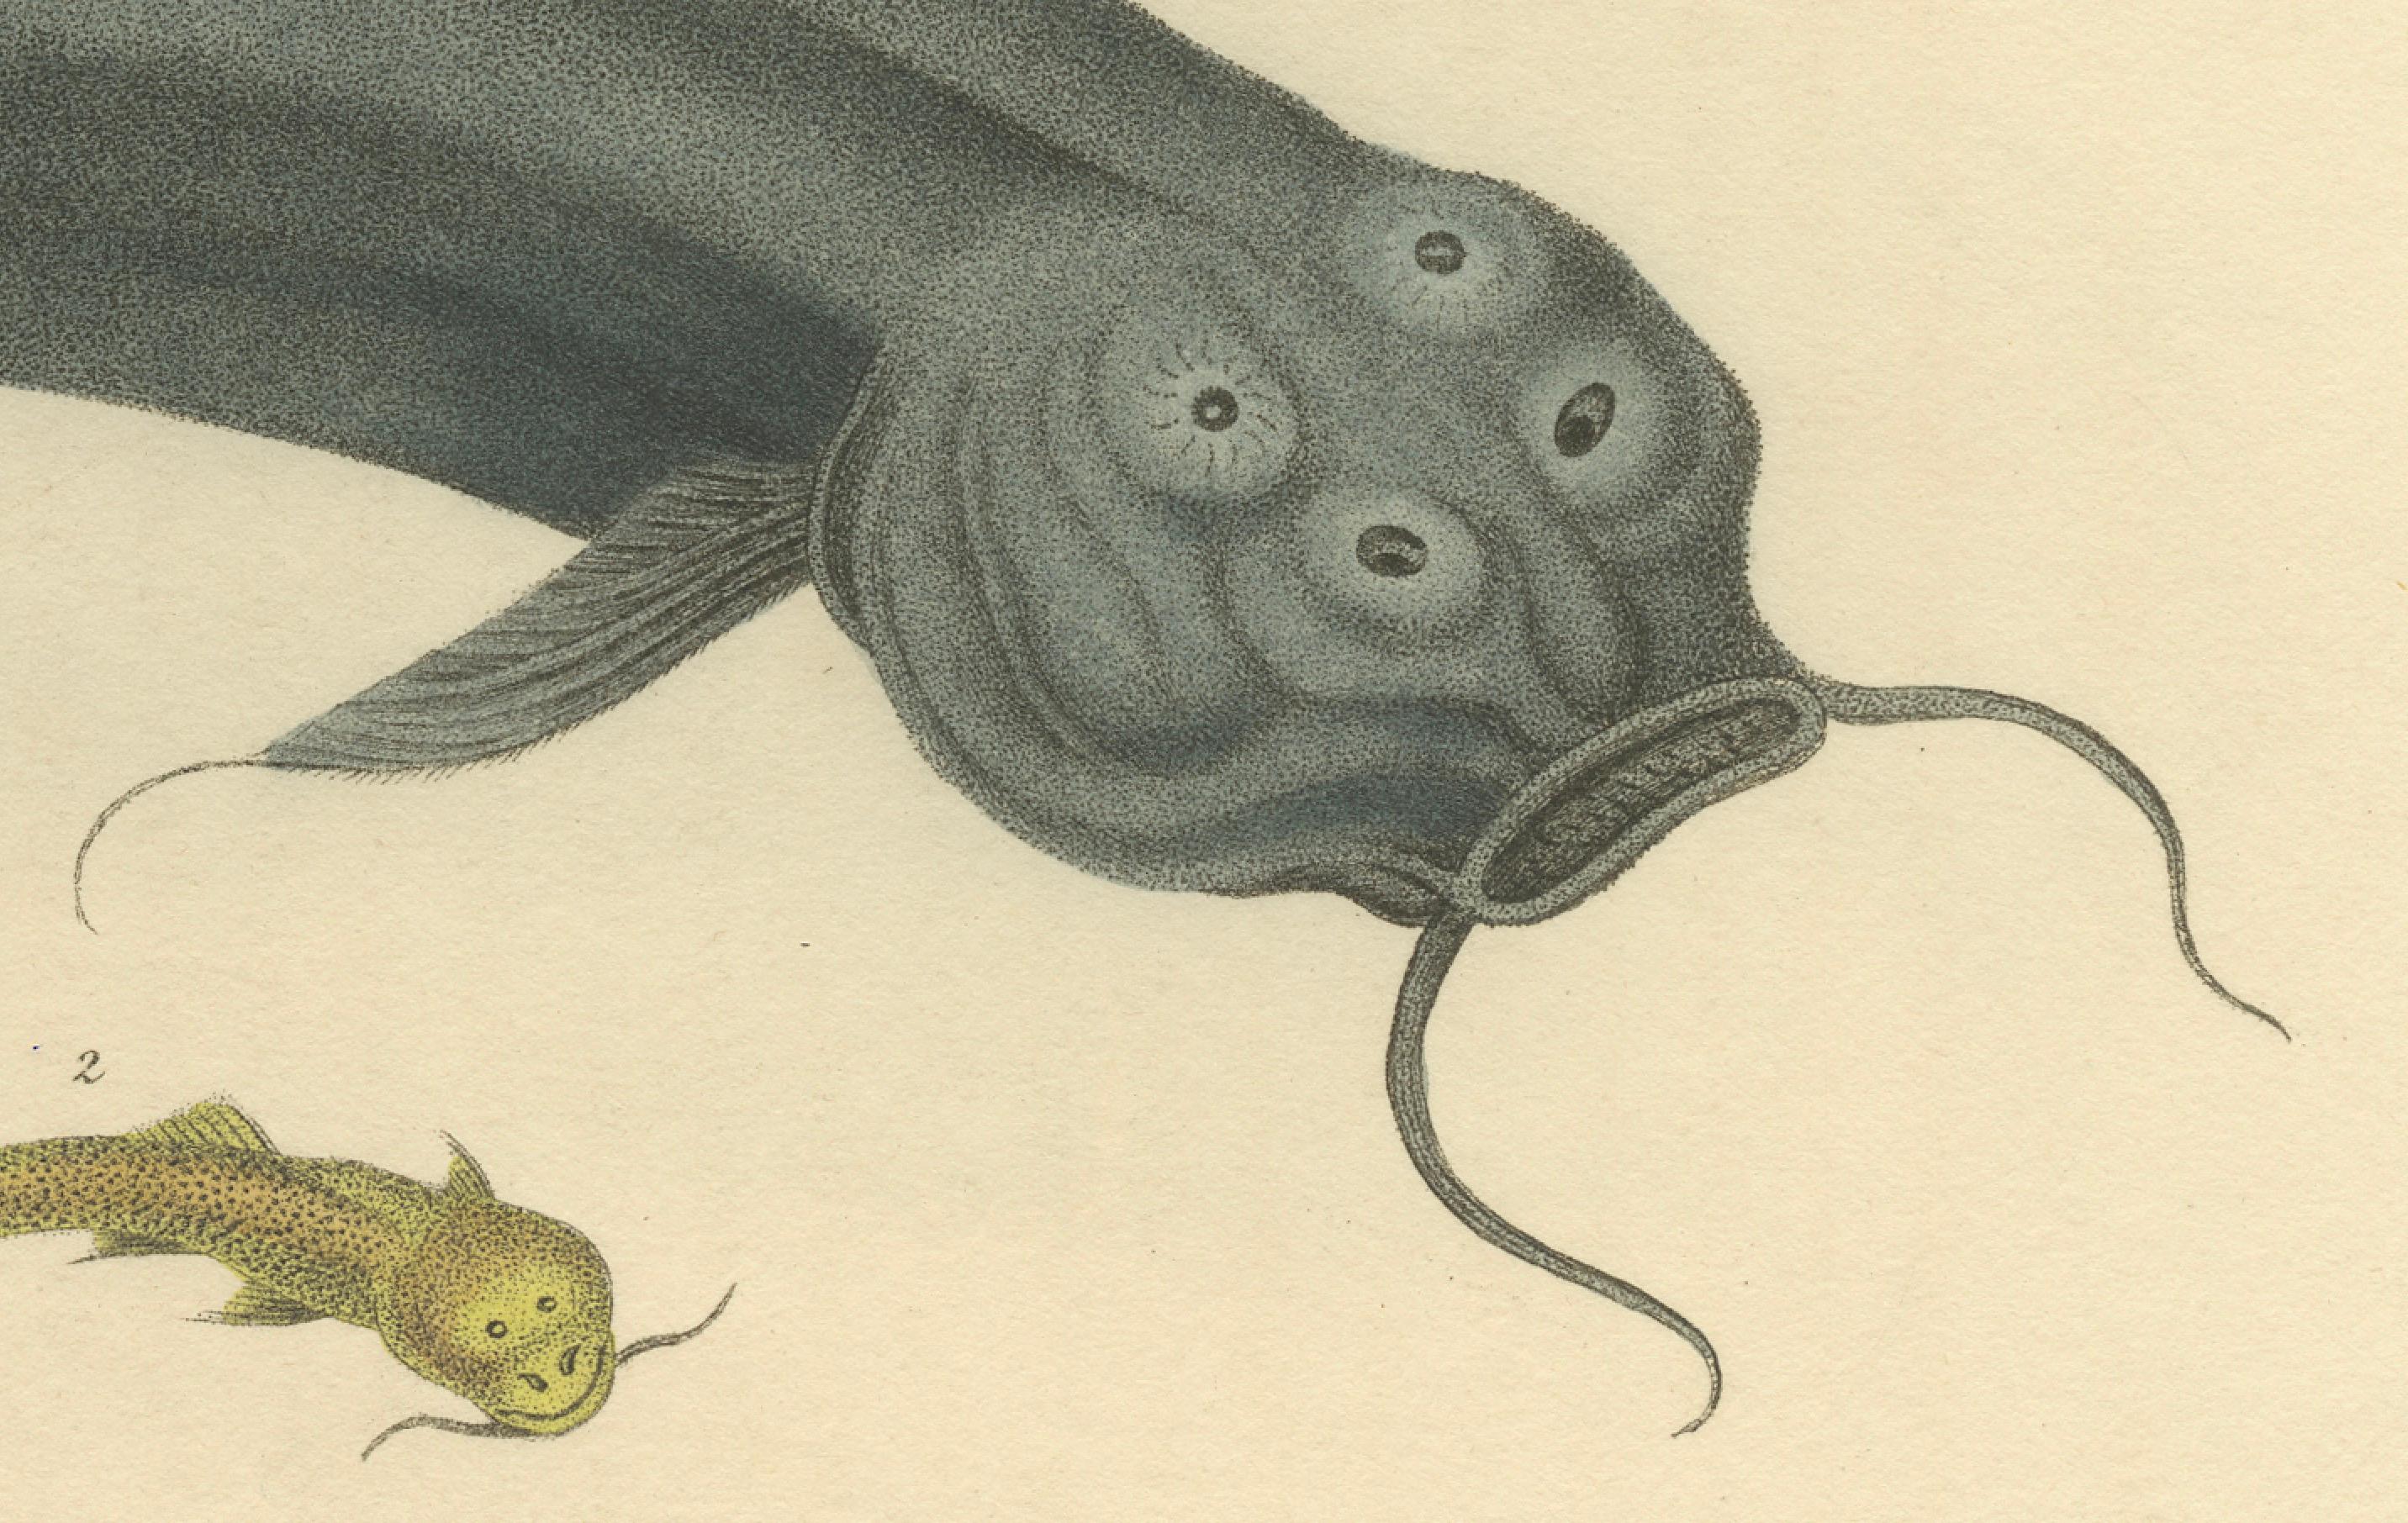 The image is an original antique print of two catfish species, labeled '1. Astroblepus Grixalvii Humb. 2. Pimelodus Cyclopum Humb.' The fish depicted are indeed catfish, as suggested by the common name associated with the genus Pimelodus, which are